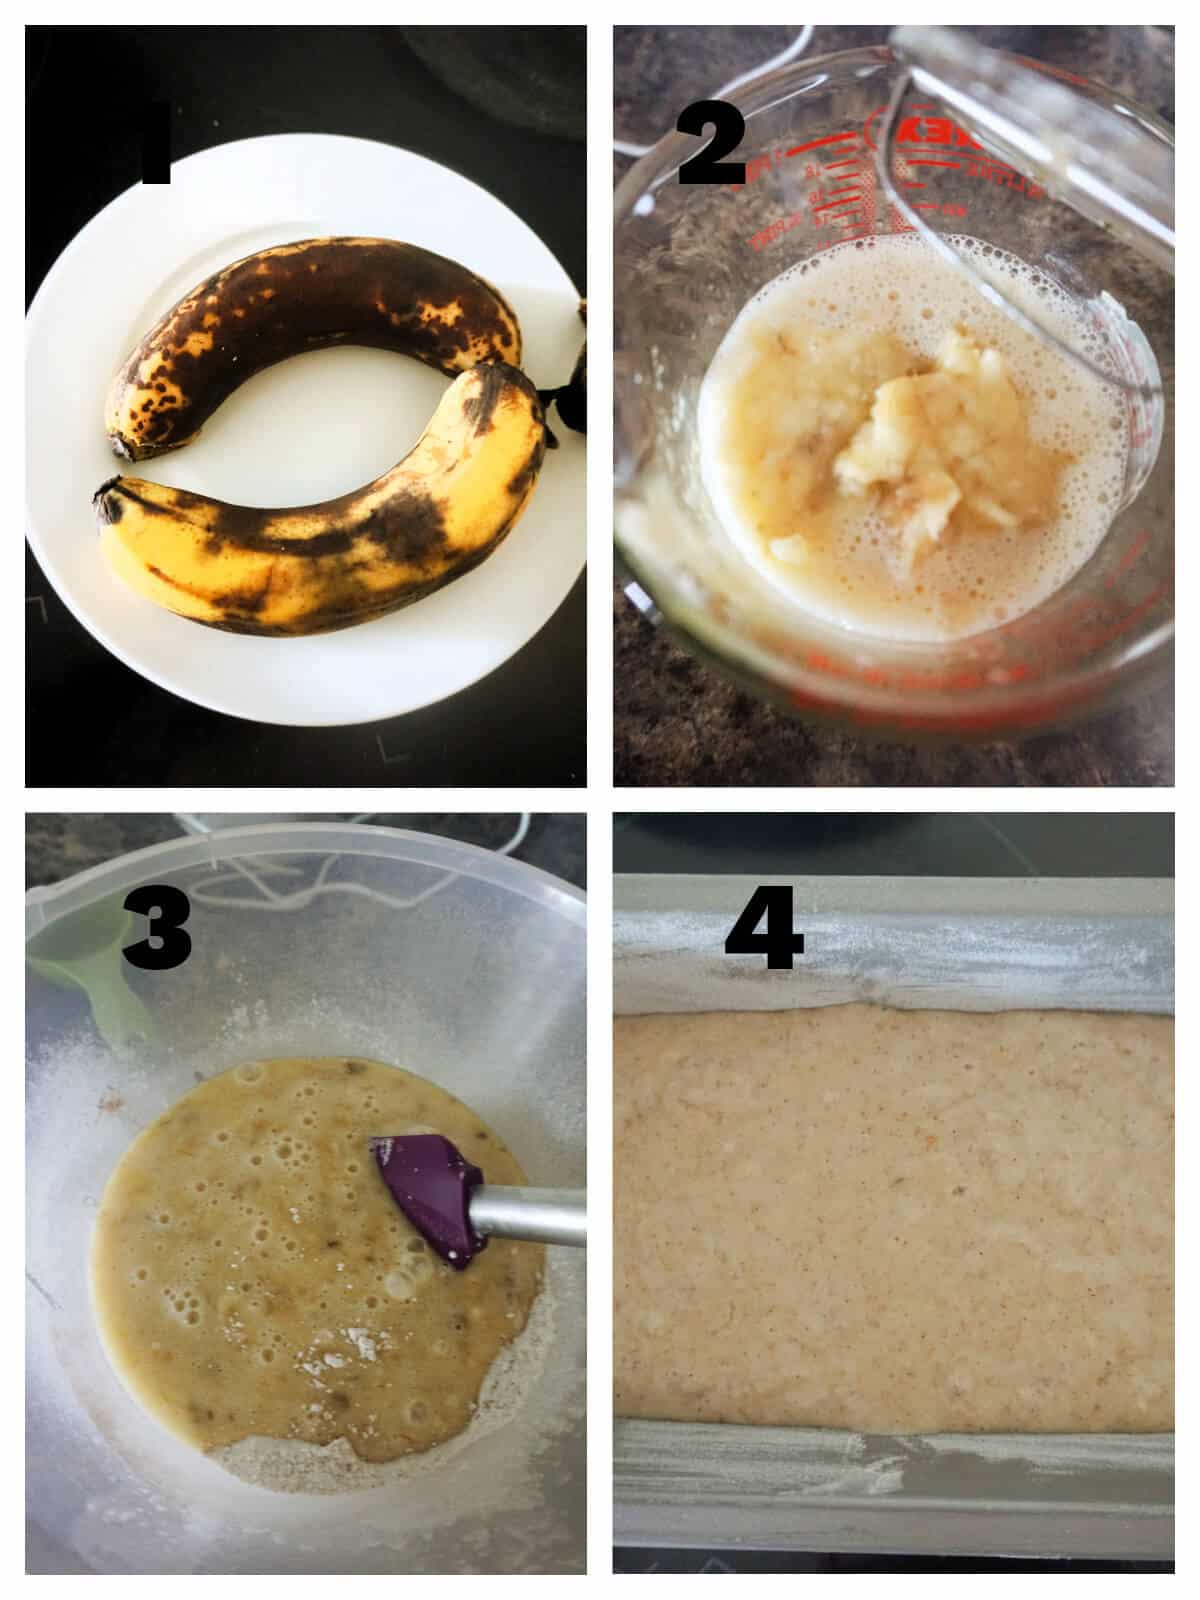 Collage of 4 photos to show how to make banana bread.